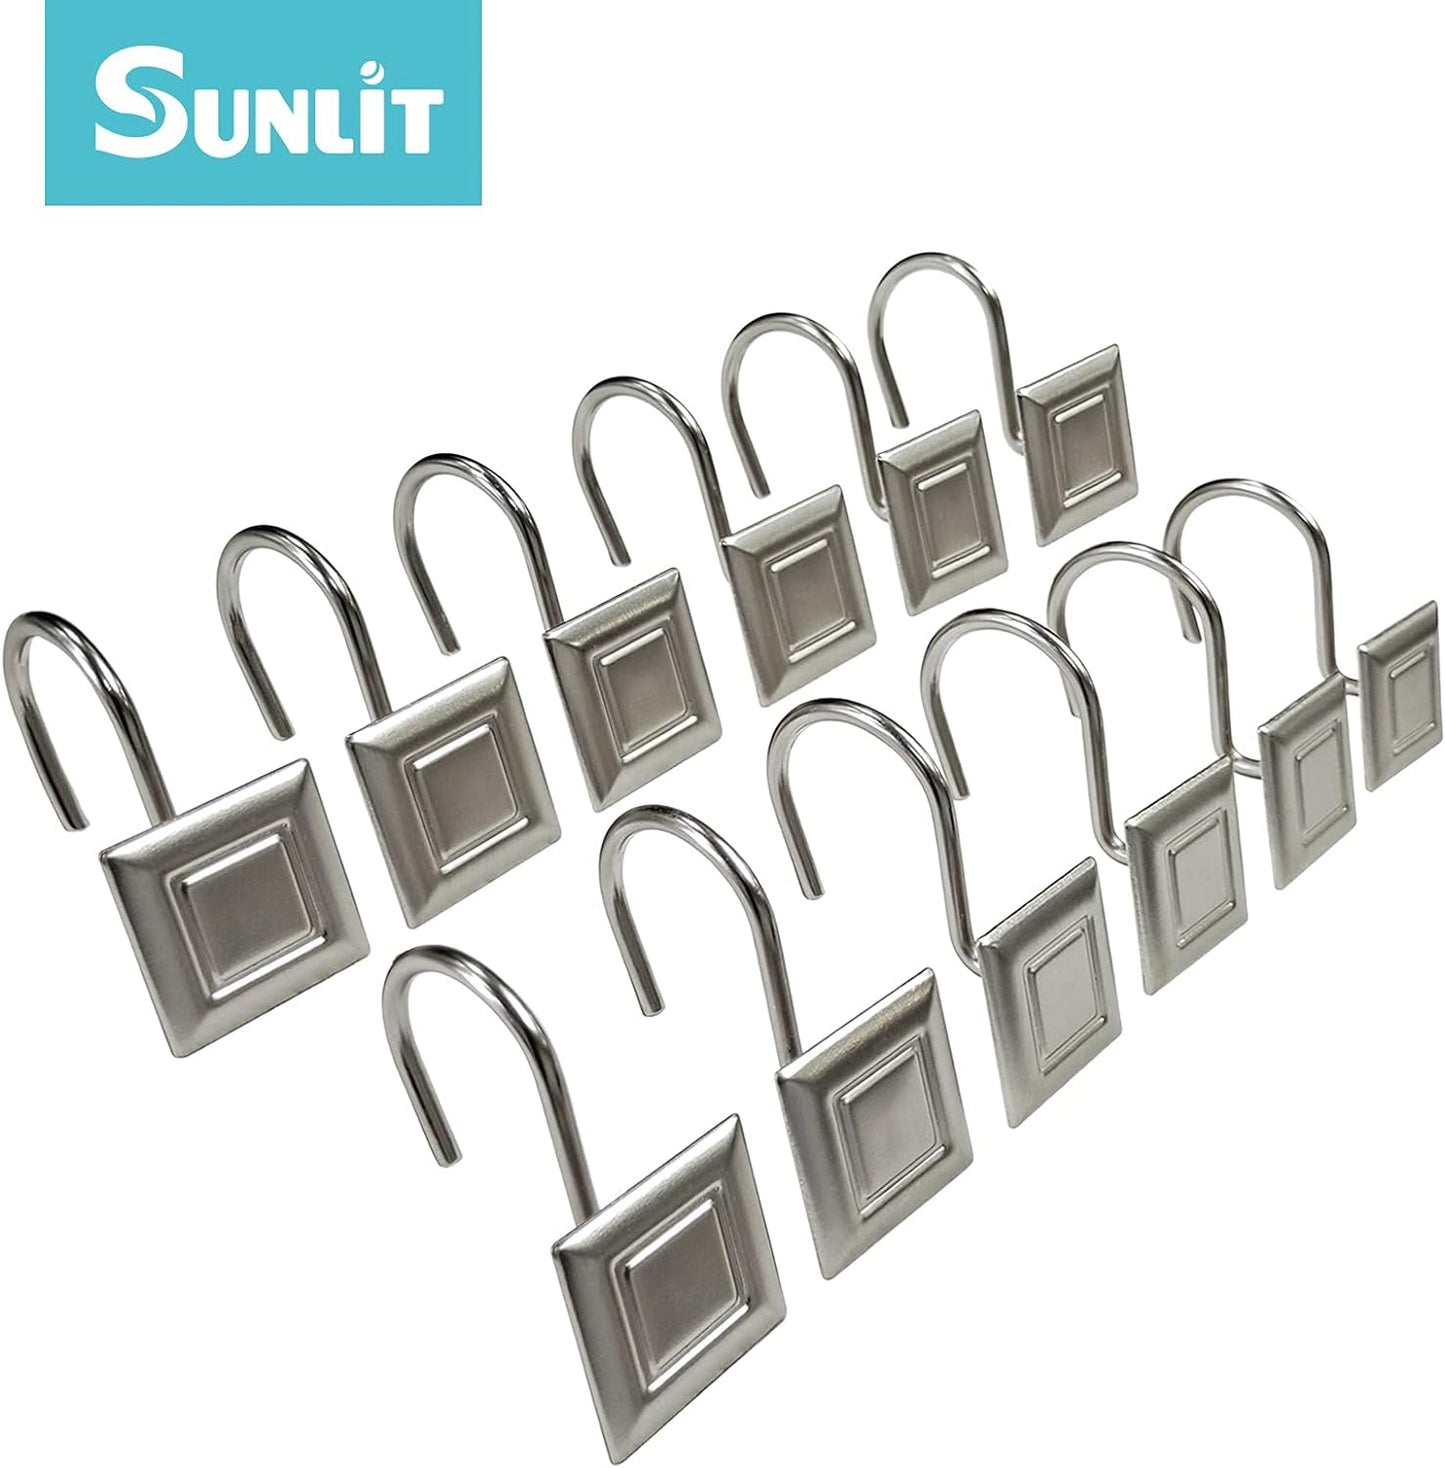 Sunlit Luxury Design Brushed Nickel Oval Shower Curtain Hooks Rust Proof Oil Rubbed Metal Shower Curtain Rings - Satin Matte Silver - 12 Pack